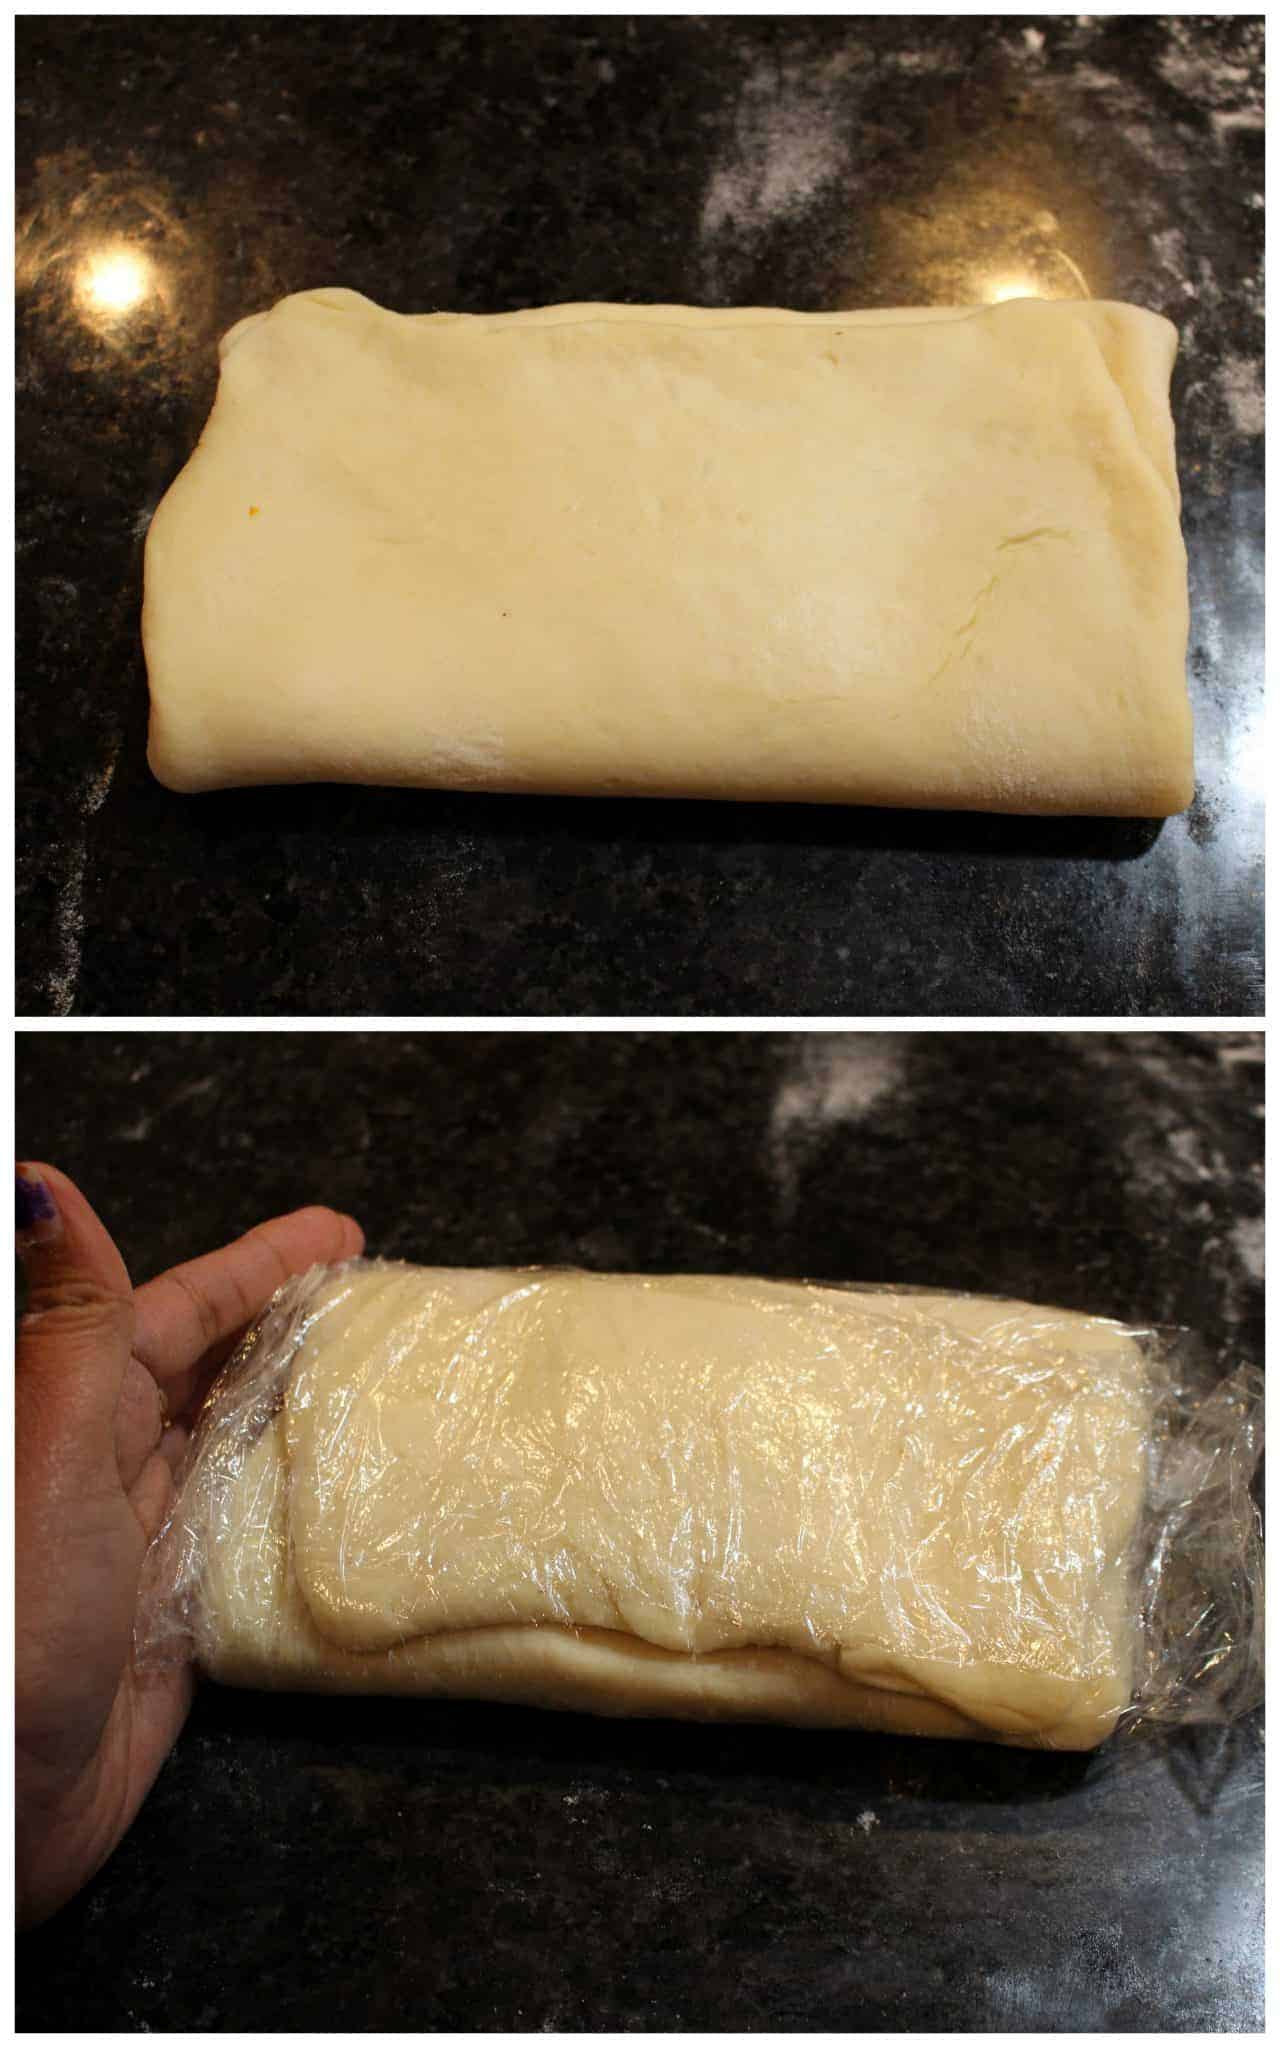 Folding the dough with wraper